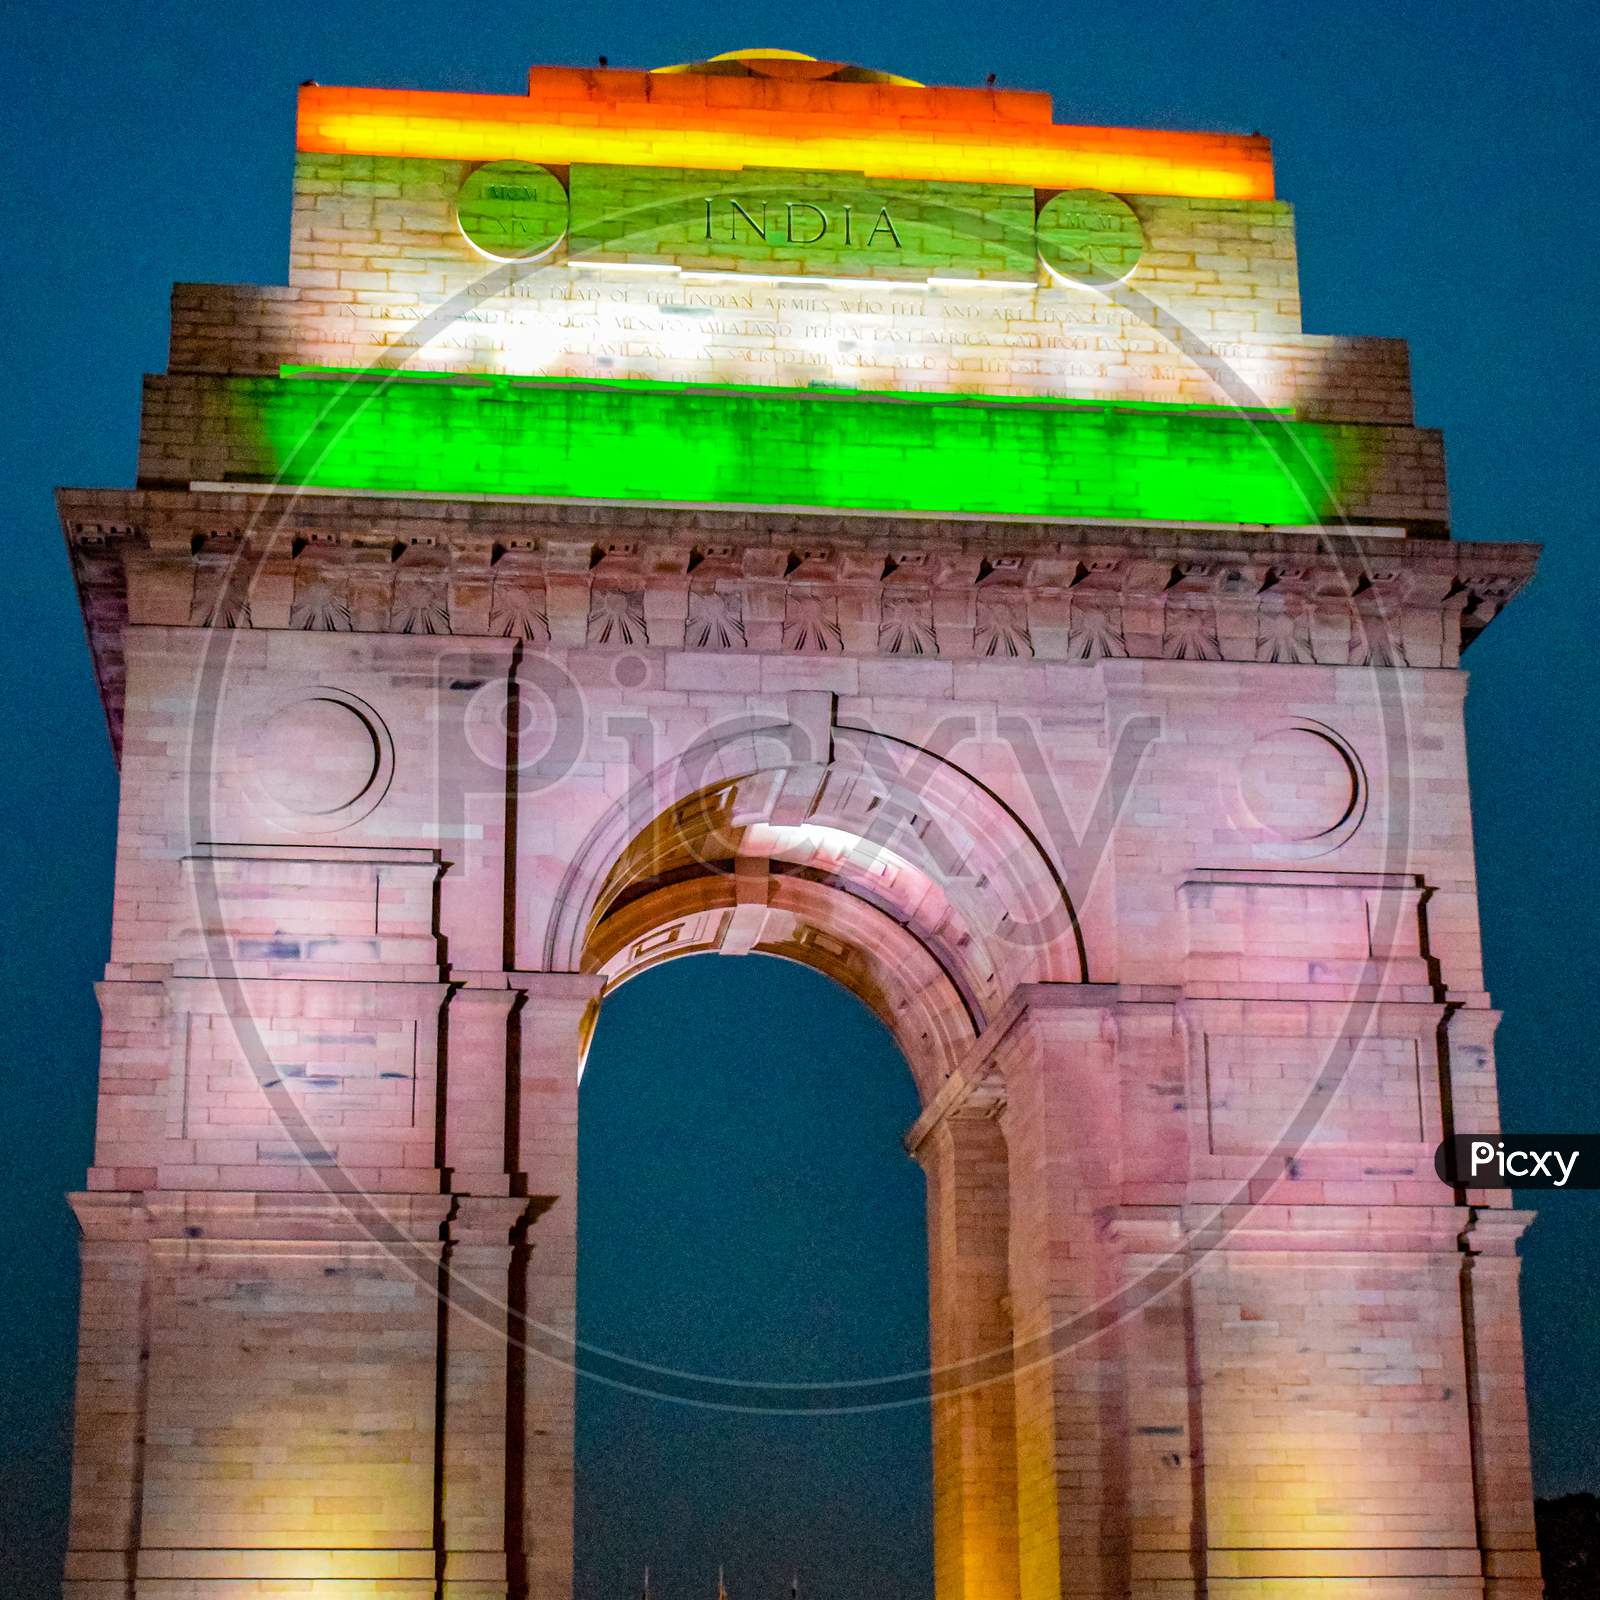 Evening View Of India Gate In Delhi India, India Gate View With Tri Colour At The Top, India Gate Architecture Full View During Evening Time